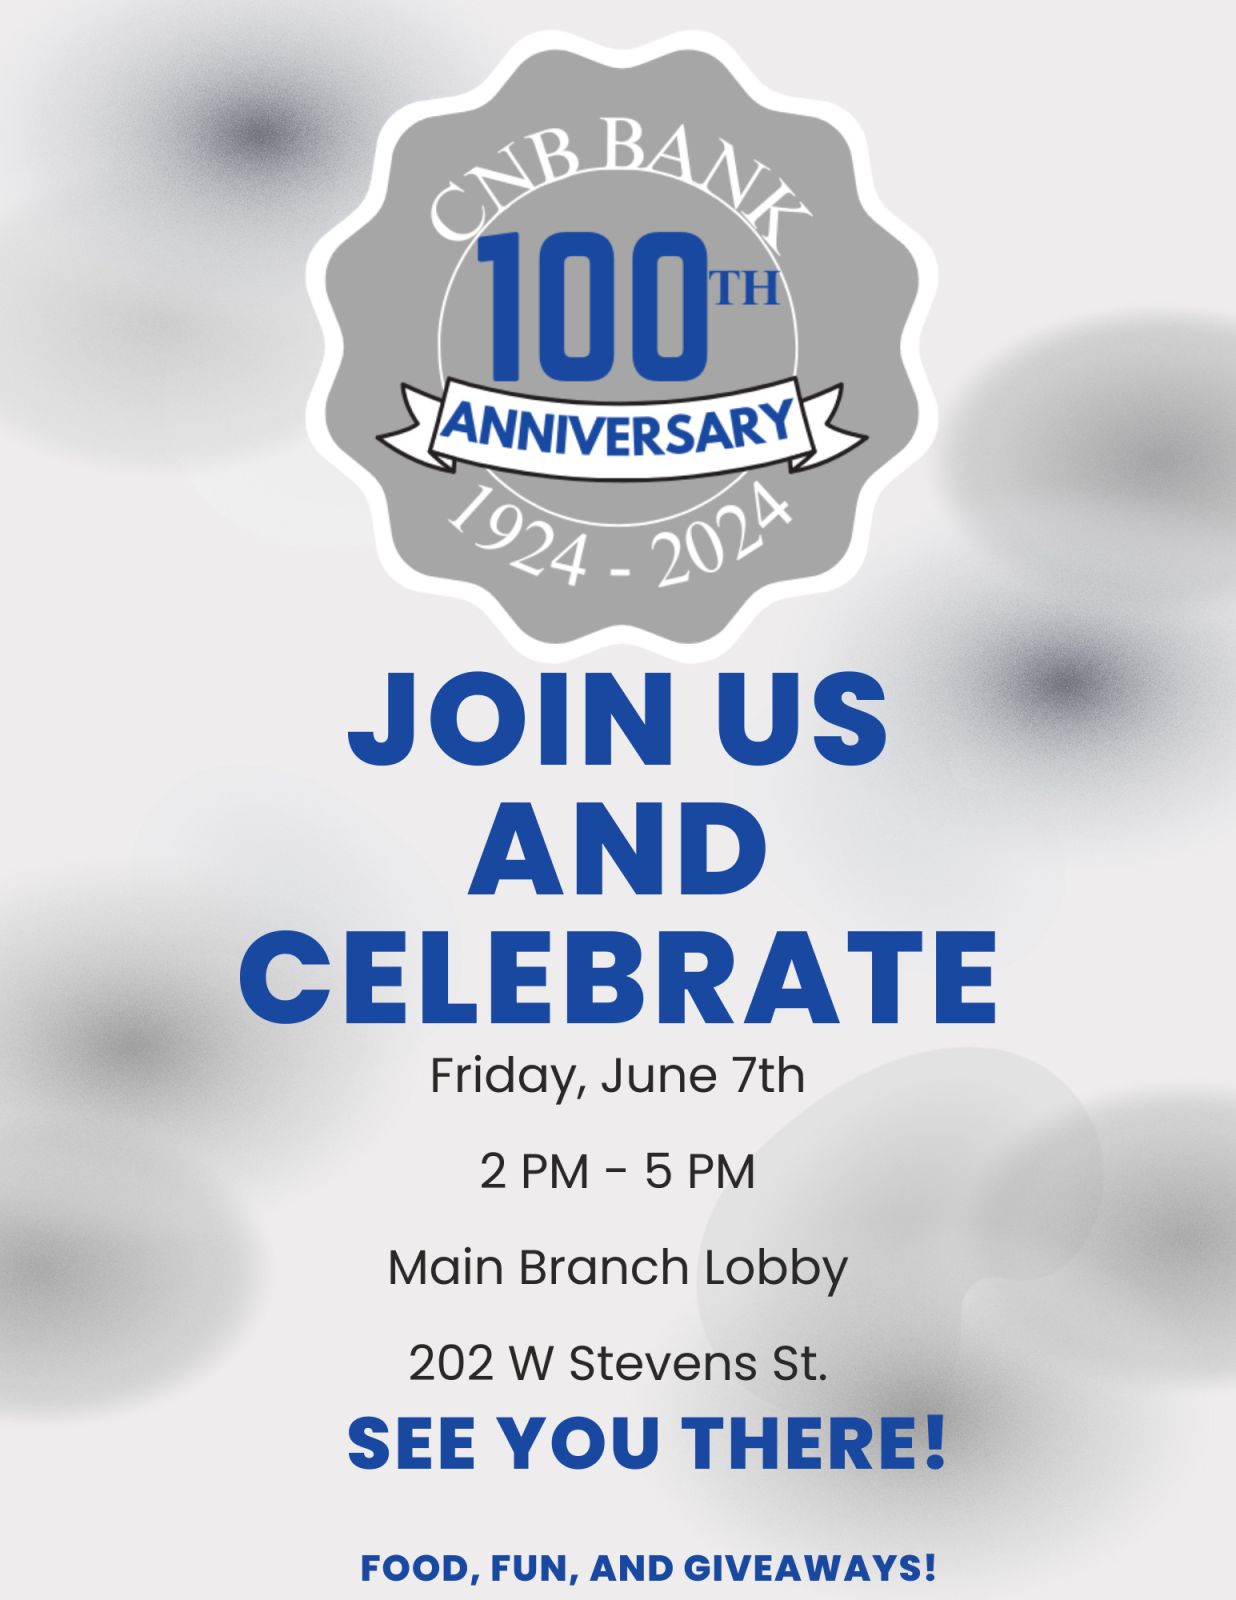 Click the CNB Bank: Celebrating a Century of Community Commitment Slide Photo to Open